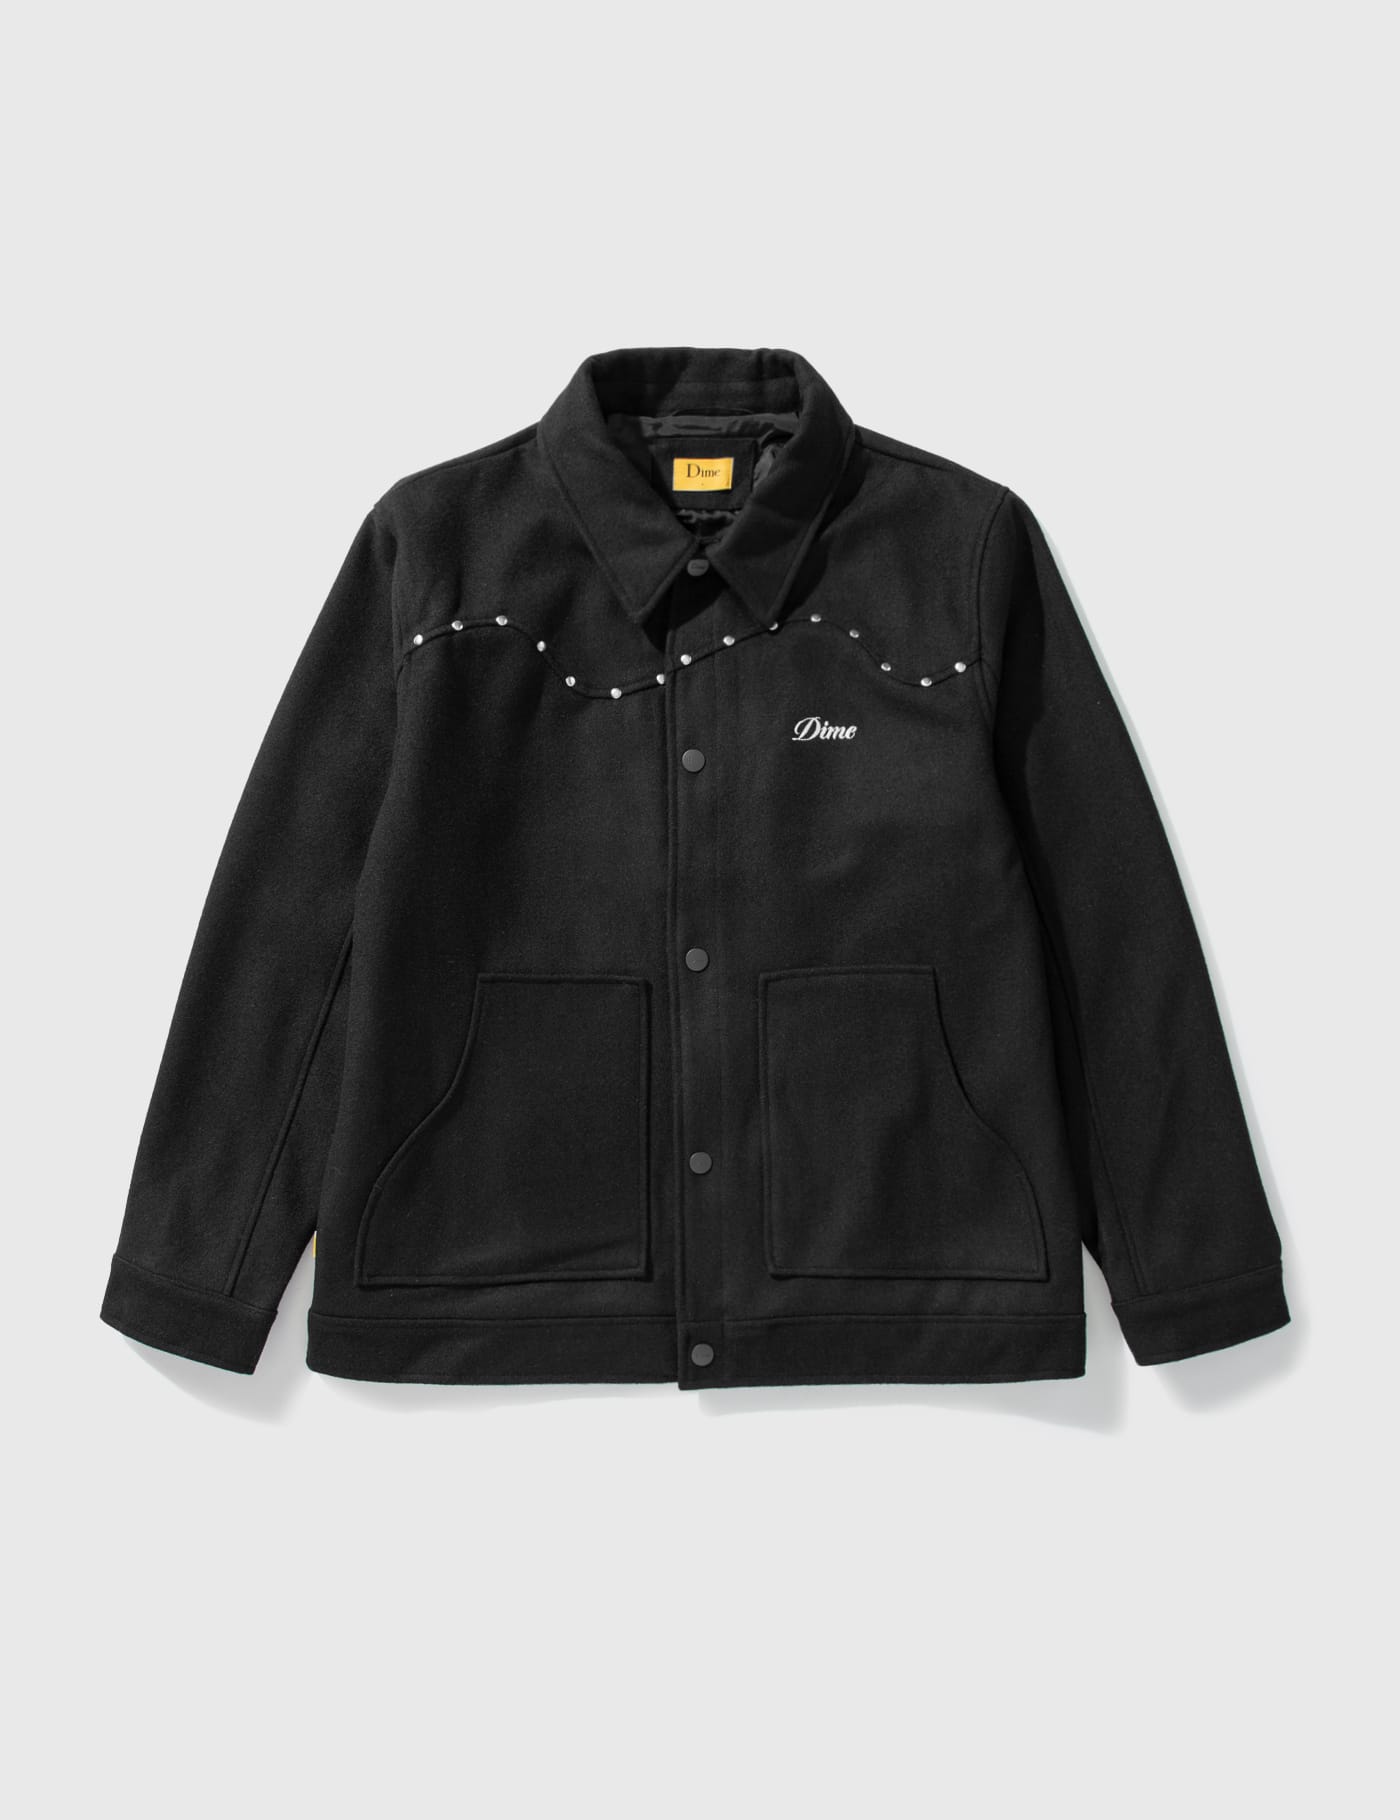 Dime - Studded Wool Bomber Jacket | HBX - Globally Curated Fashion